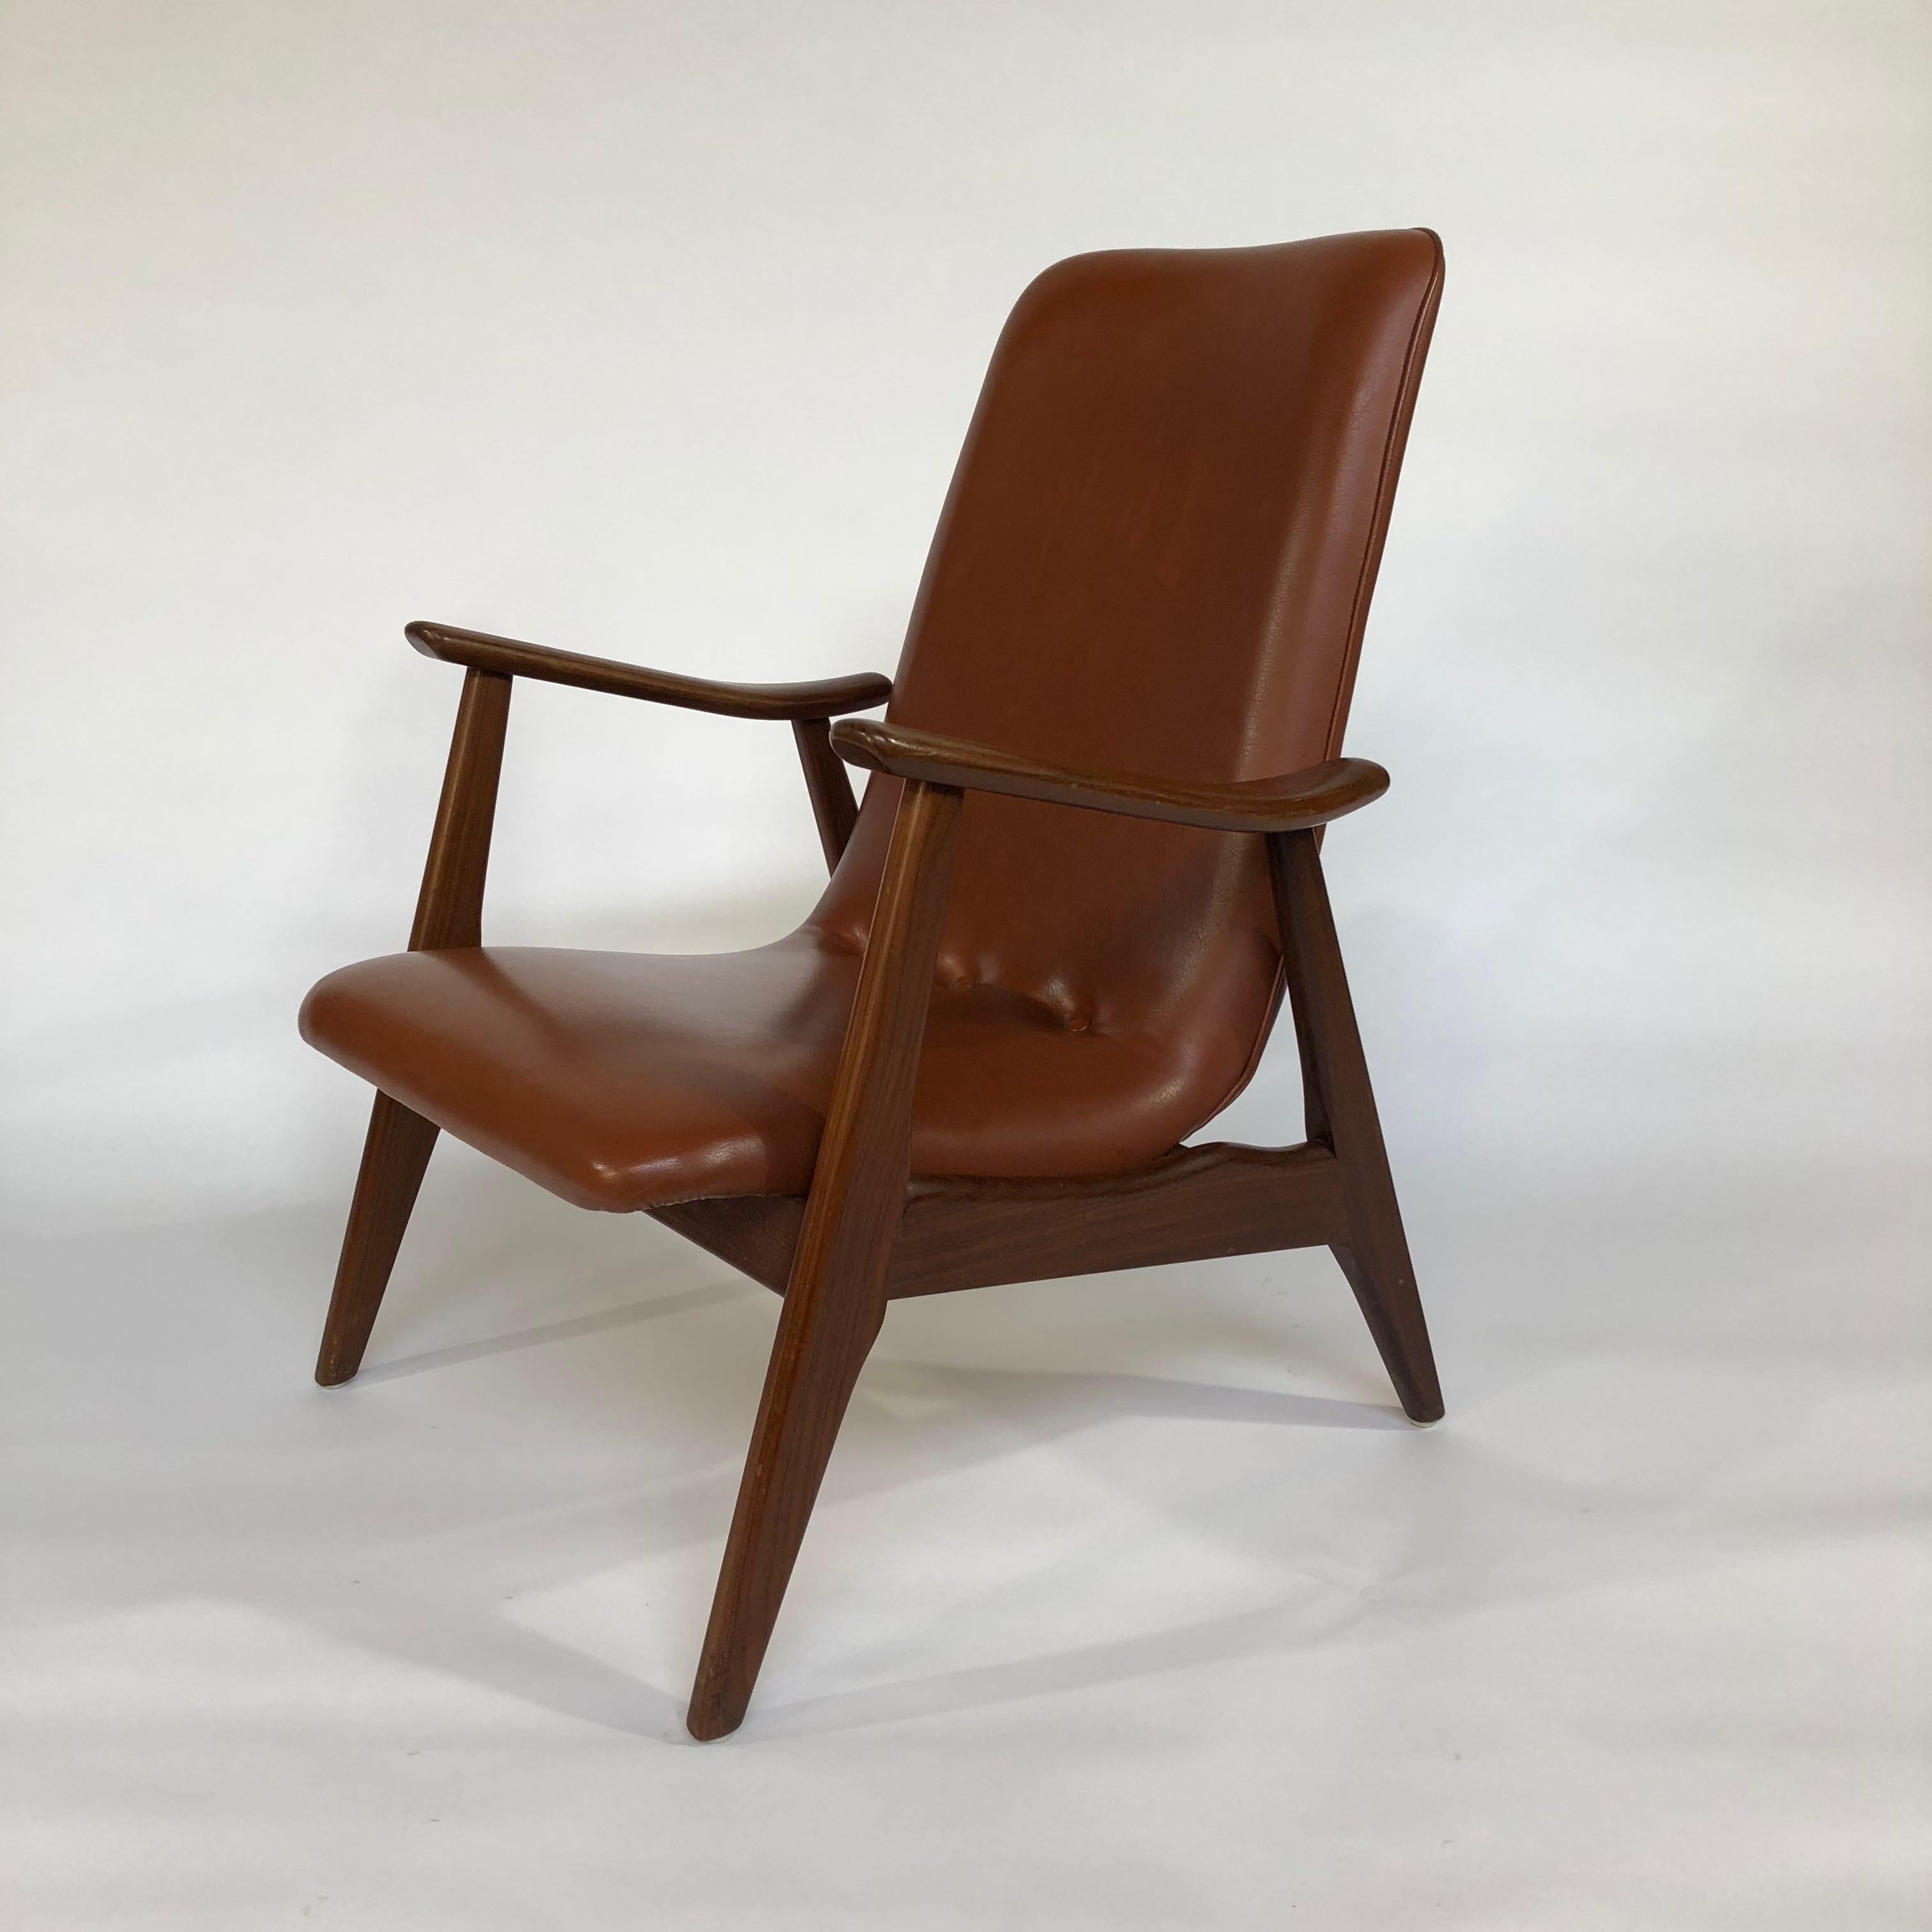 Dutch design lounge chair by Webe by Louis Van Teeffelen, 1960s. The chair is made of solid Teak and has the original cognac colored faux leather upholstery
This chair, with the high back is a mans version we also have the woman's version in the